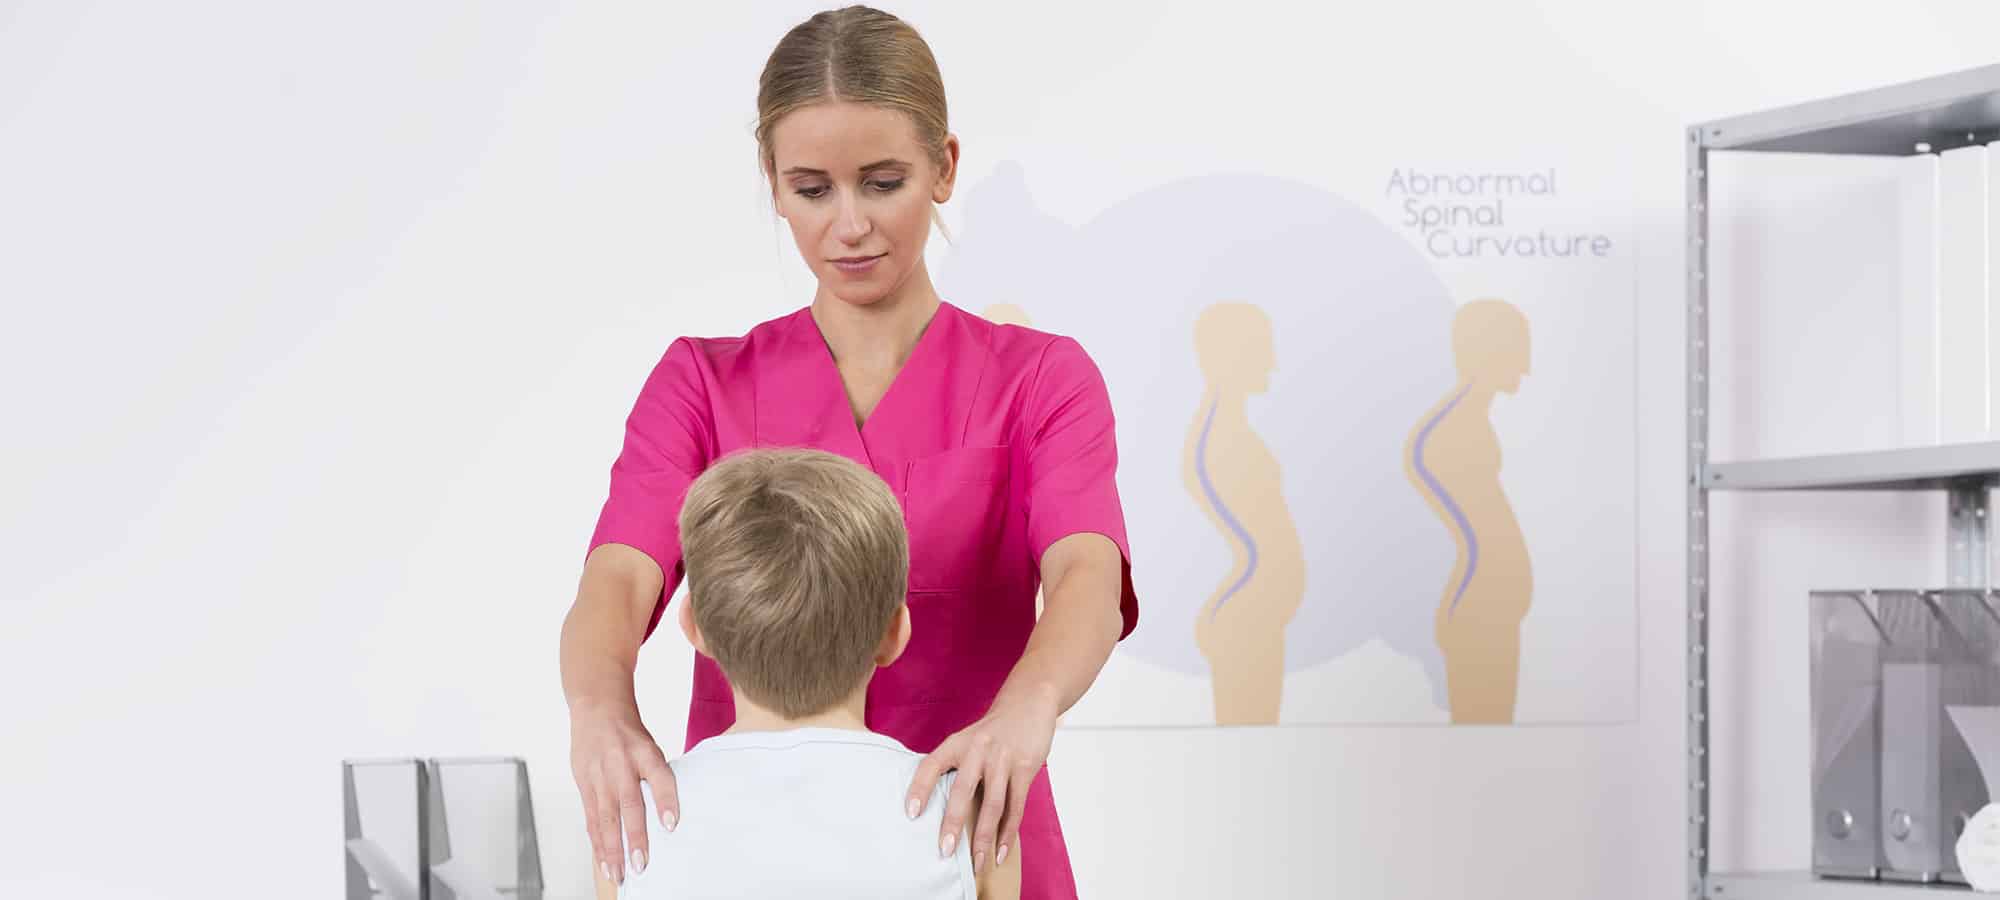 How Paediatric Physiotherapy can Help with Disabilities